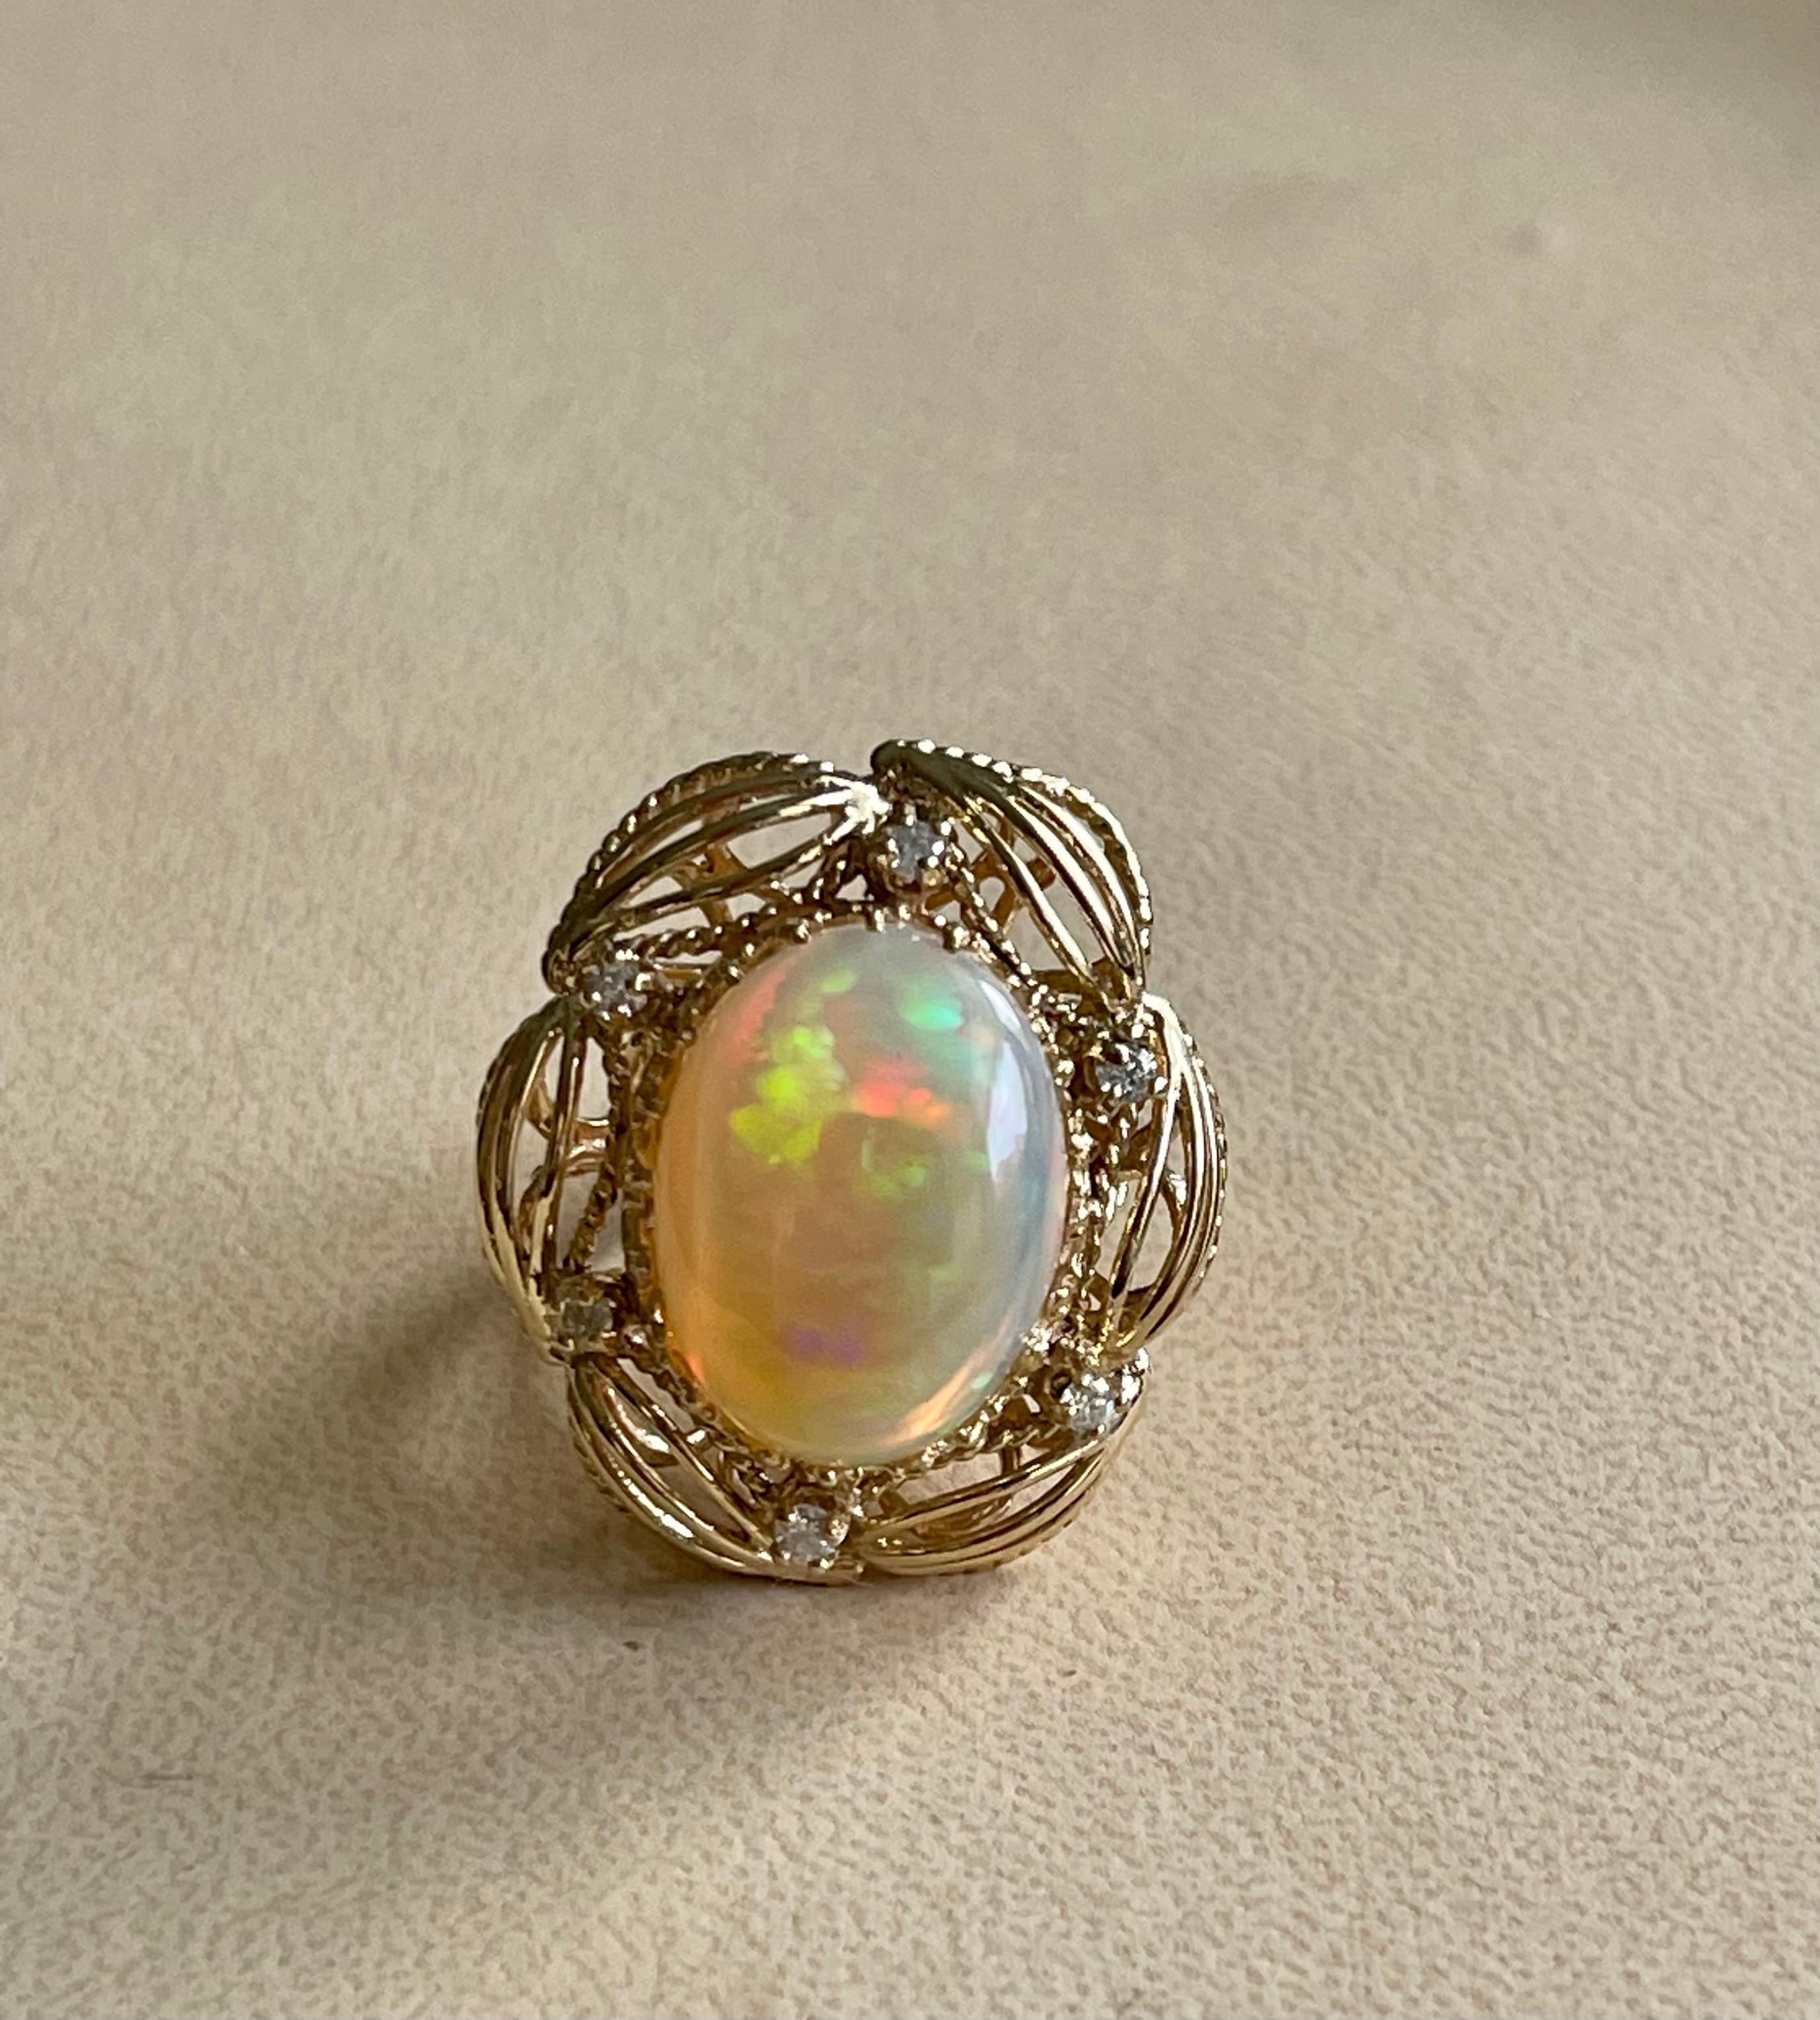 15 Carat Oval Shape Ethiopian Opal Cocktail Ring 14 Karat Yellow Gold Solid Ring For Sale 1